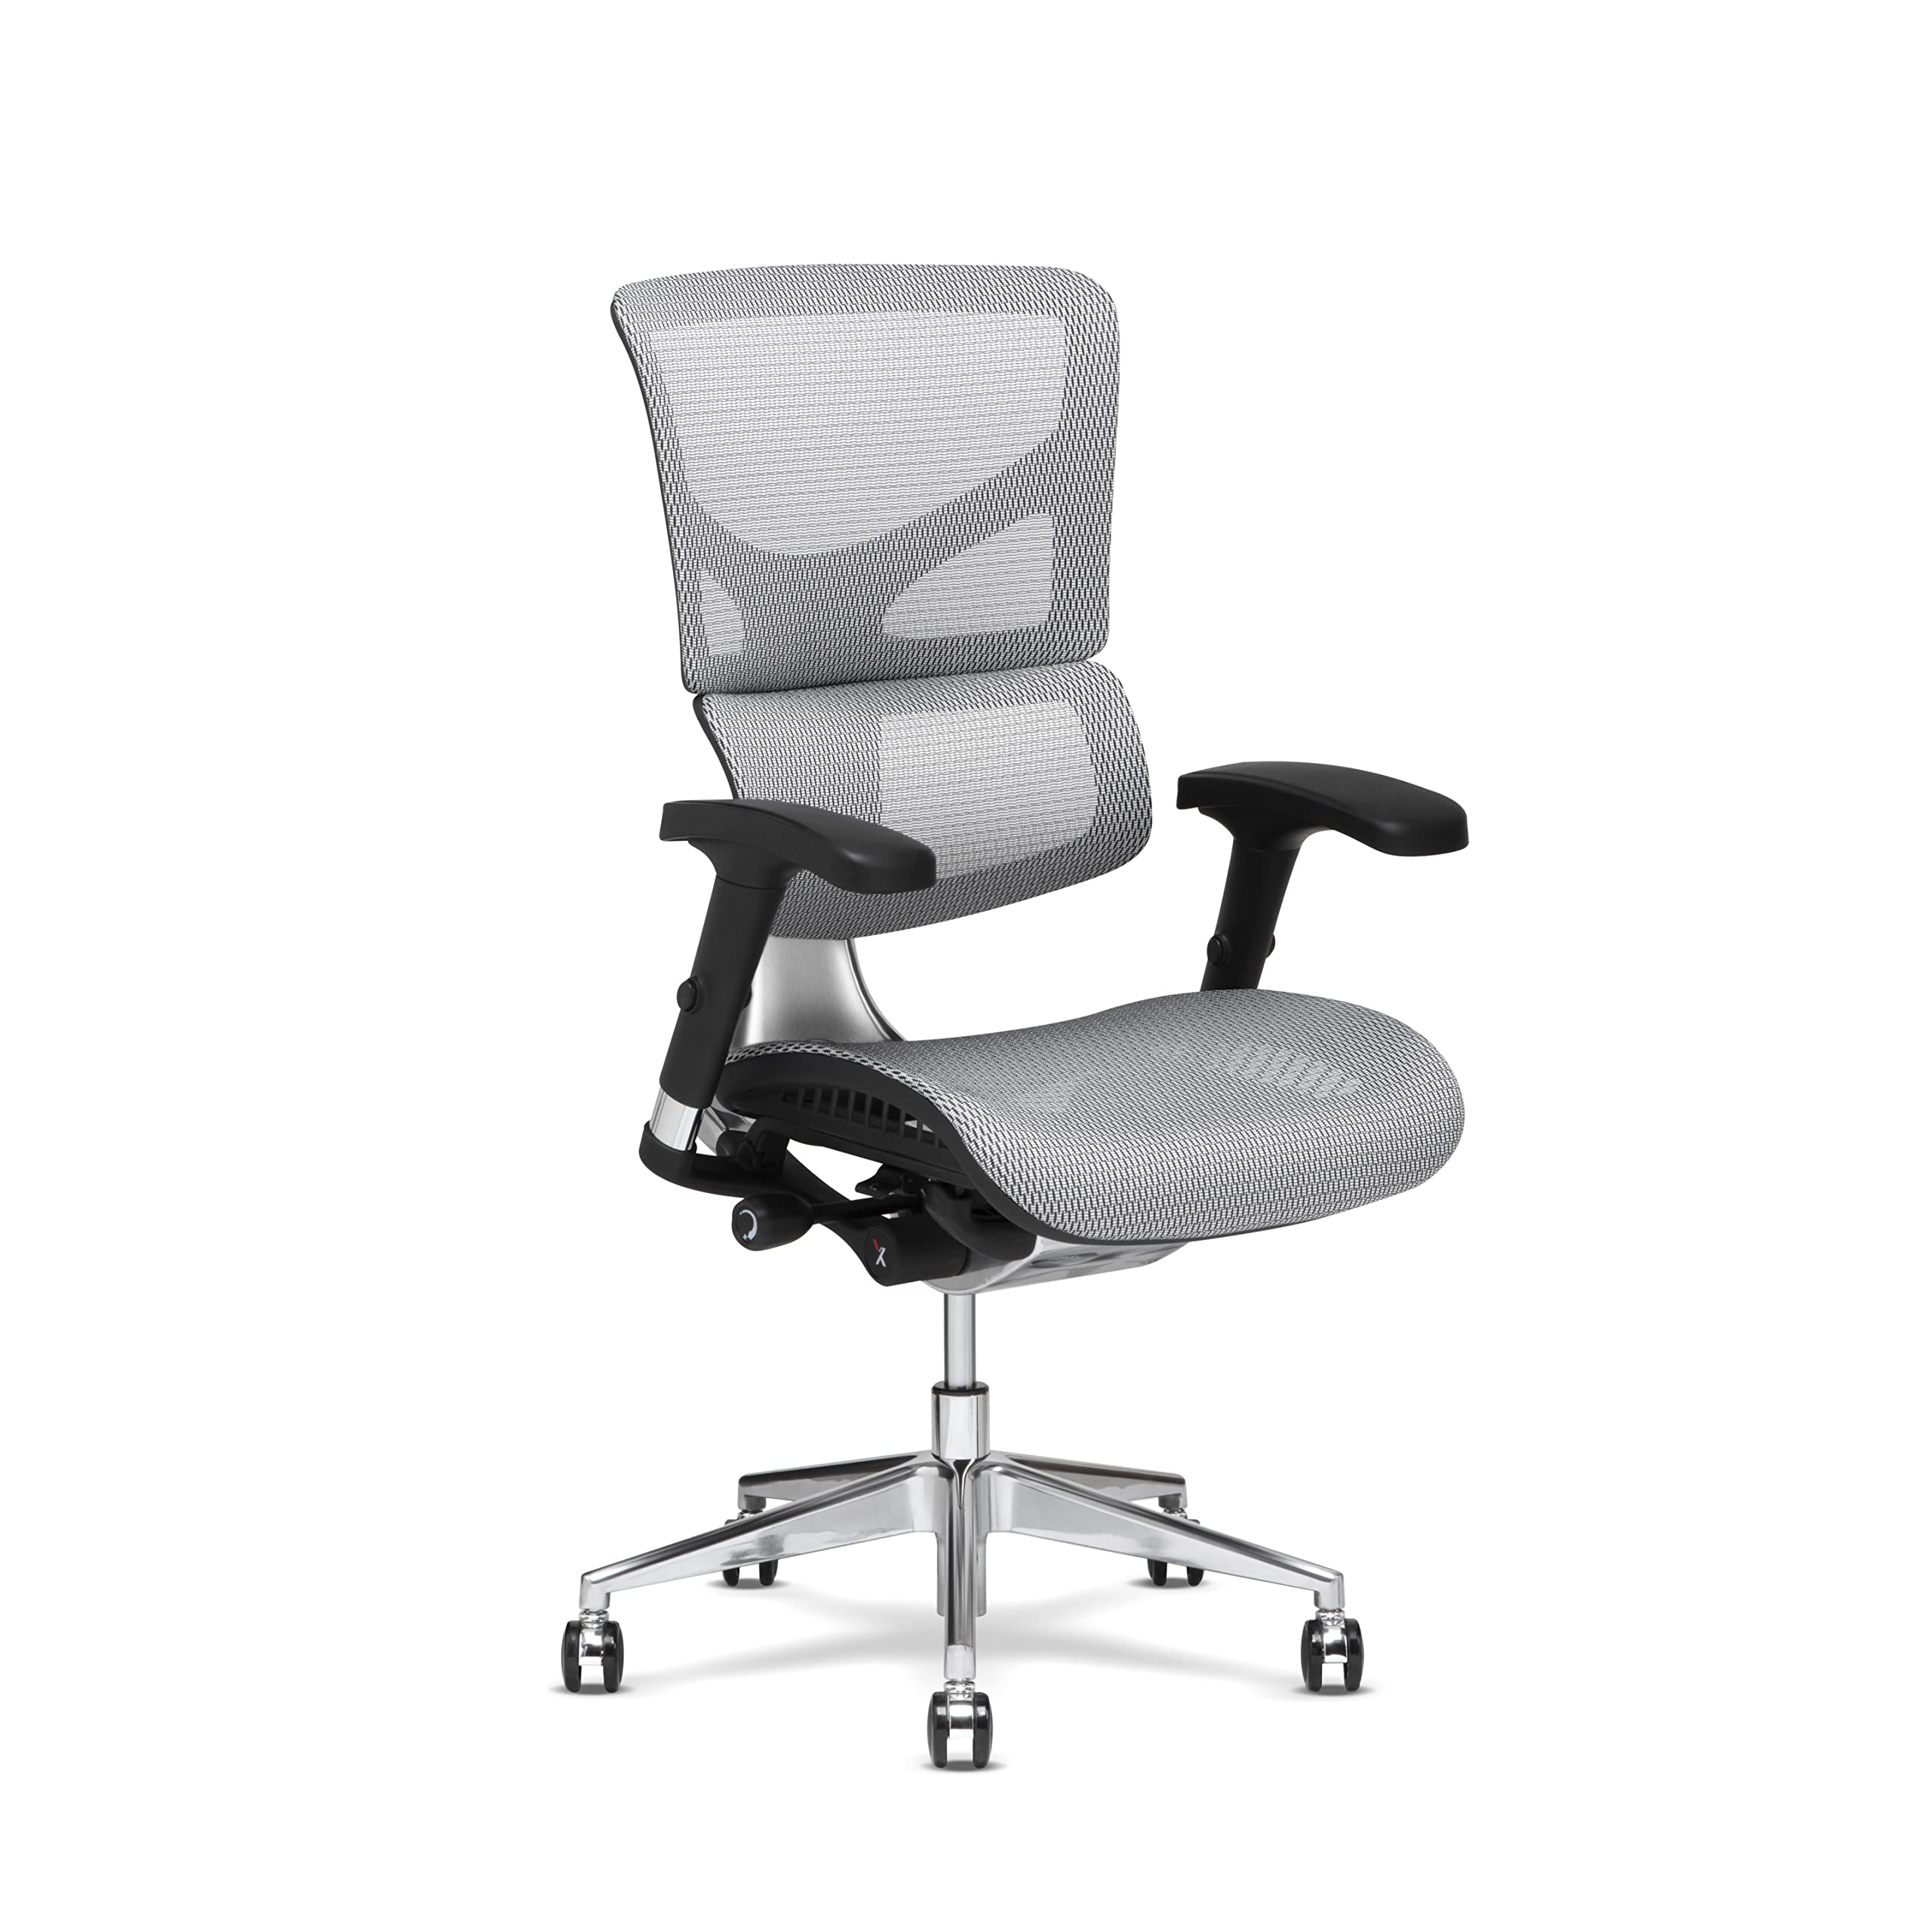 X-Chair X2 Management Task Chair, White K-Sport Mesh Fabric - Ergonomic Office Seat/Dynamic Variable Lumbar Support/Floating Recline/Highly Adjusta...